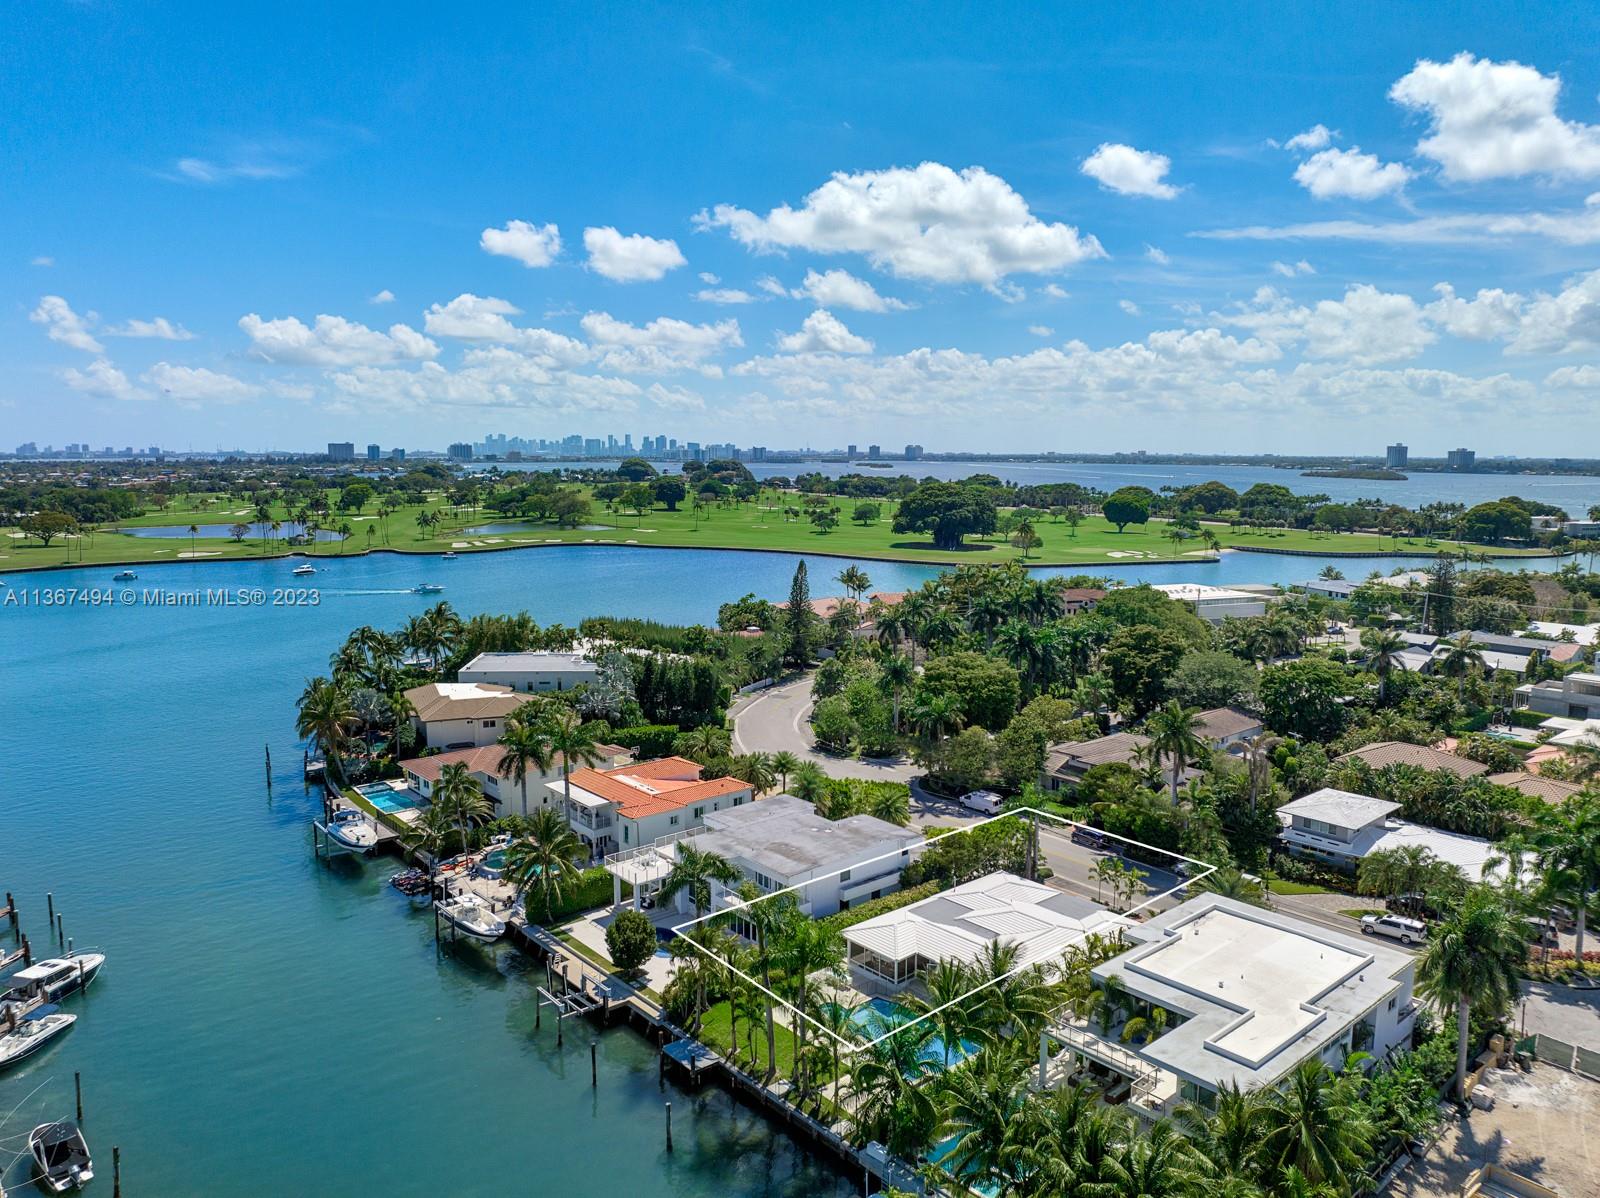 Waterfront Bay Harbor Islands Jewel, Renovated Art Deco home within walking distance to Bal Harbour Shops, Restaurants and Houses of Worship. Best location for Paddle boarding, Kayaking , and Boating. 75ft of Water frontage. 4 Bedroom and 4 Baths Plus Powder Room.